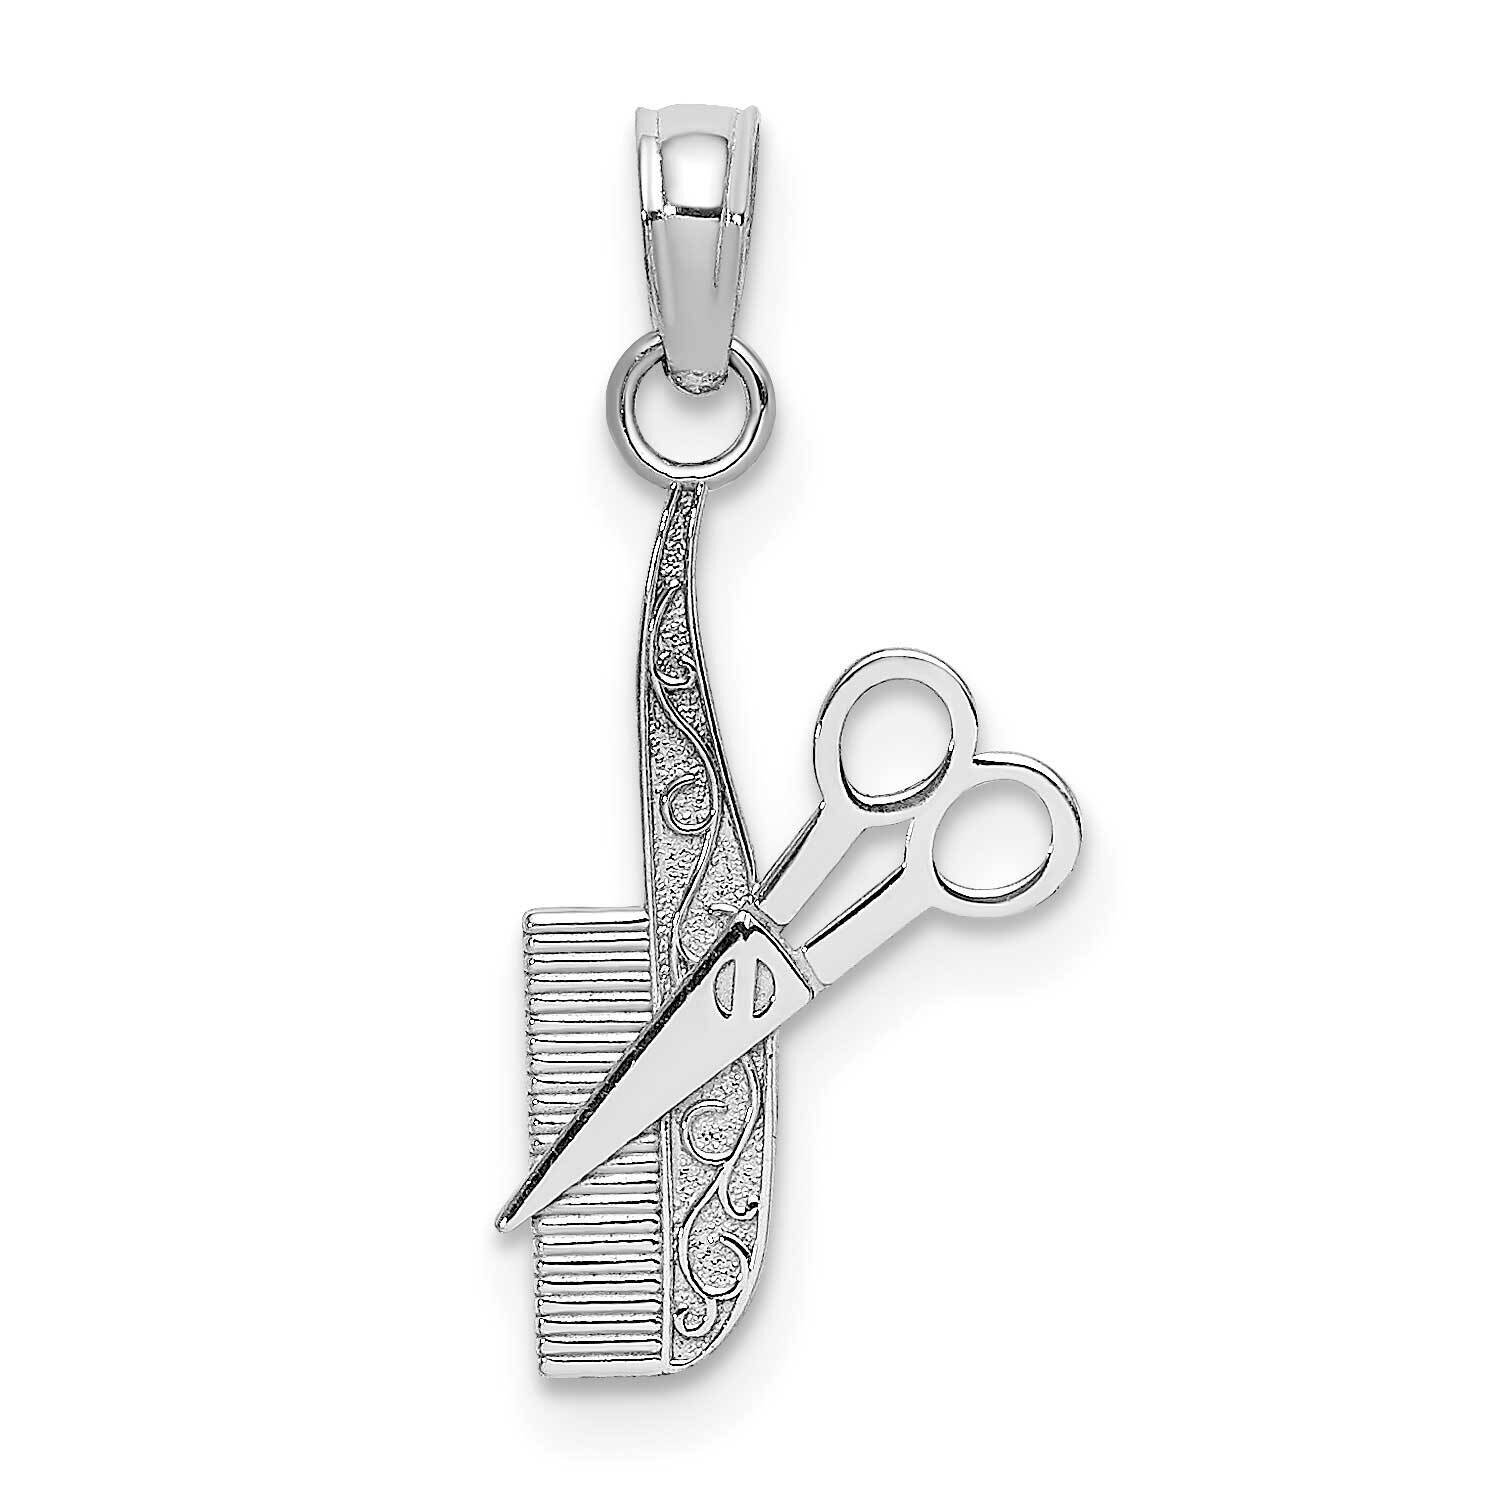 Texuted Hairdresser Comb Scissors Charm 14k White Gold K4940W